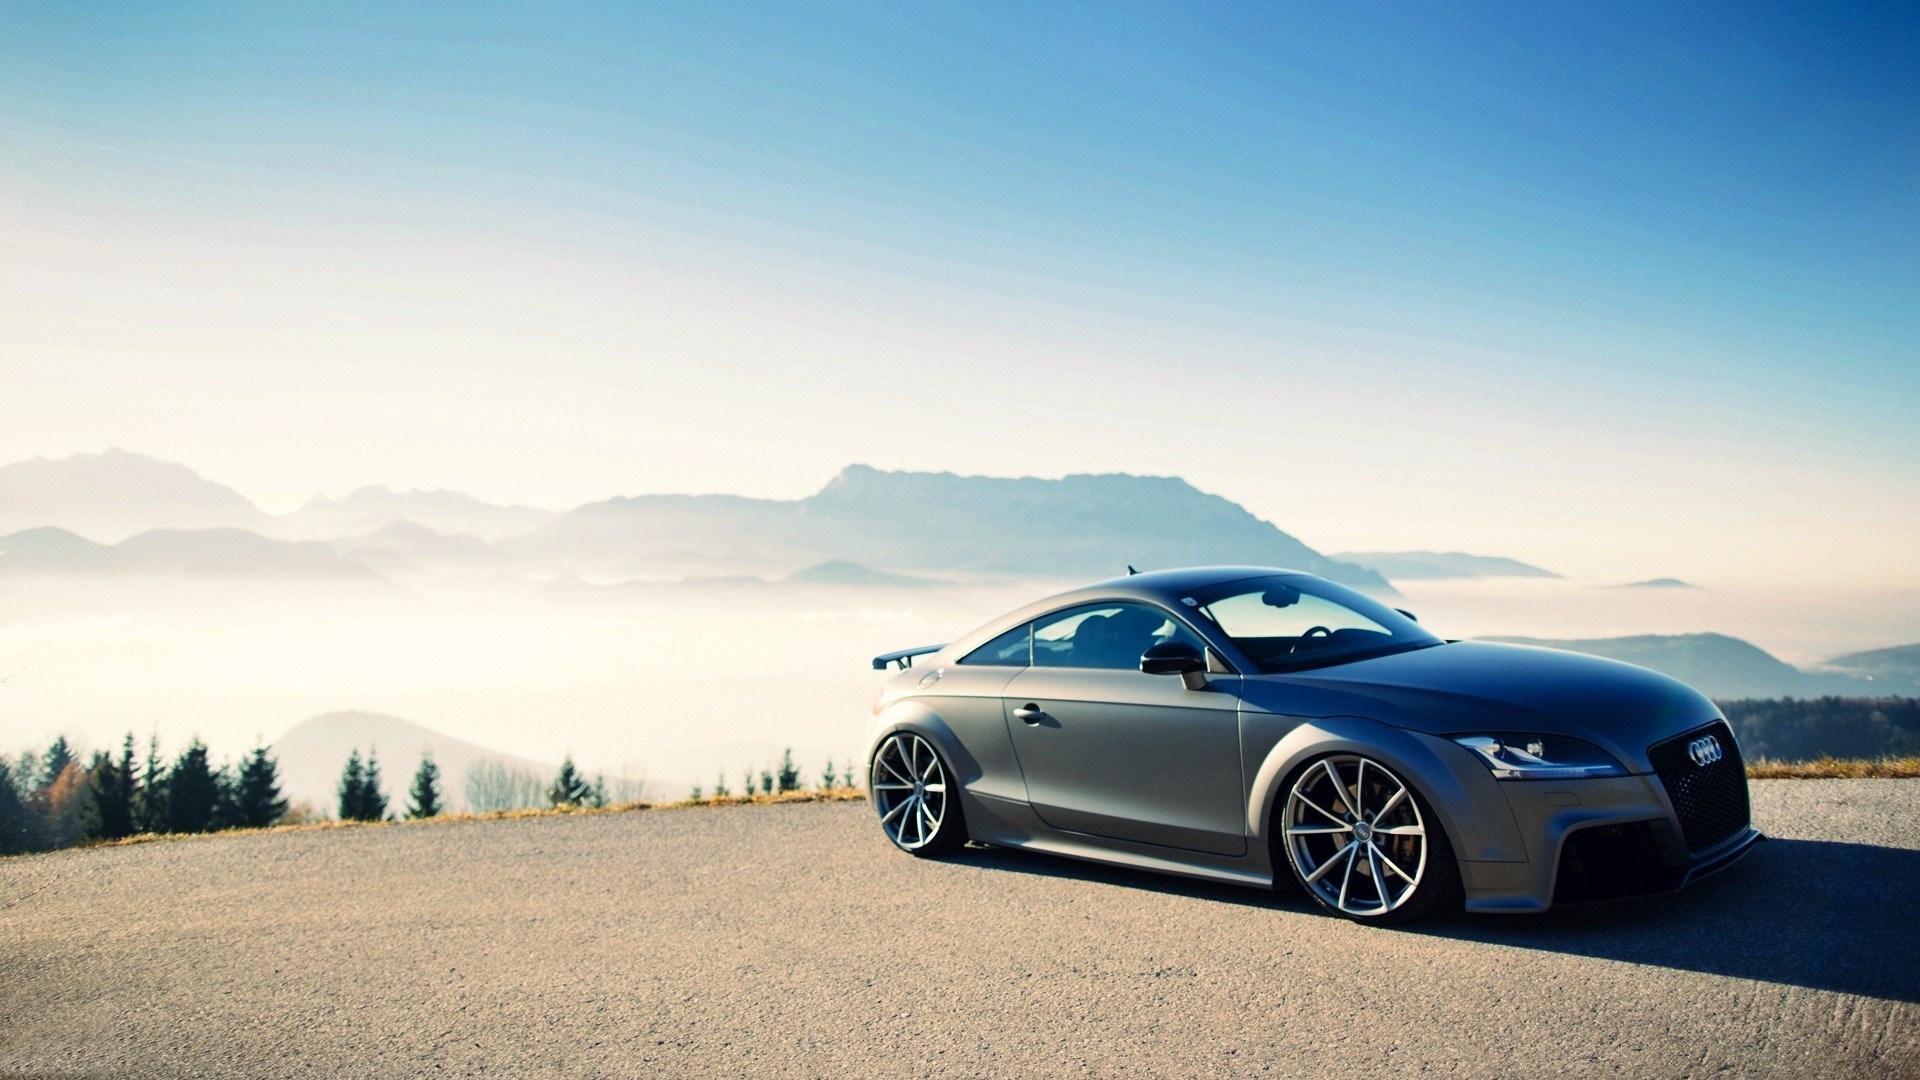 Audi TT Wallpapers Collection (25+)